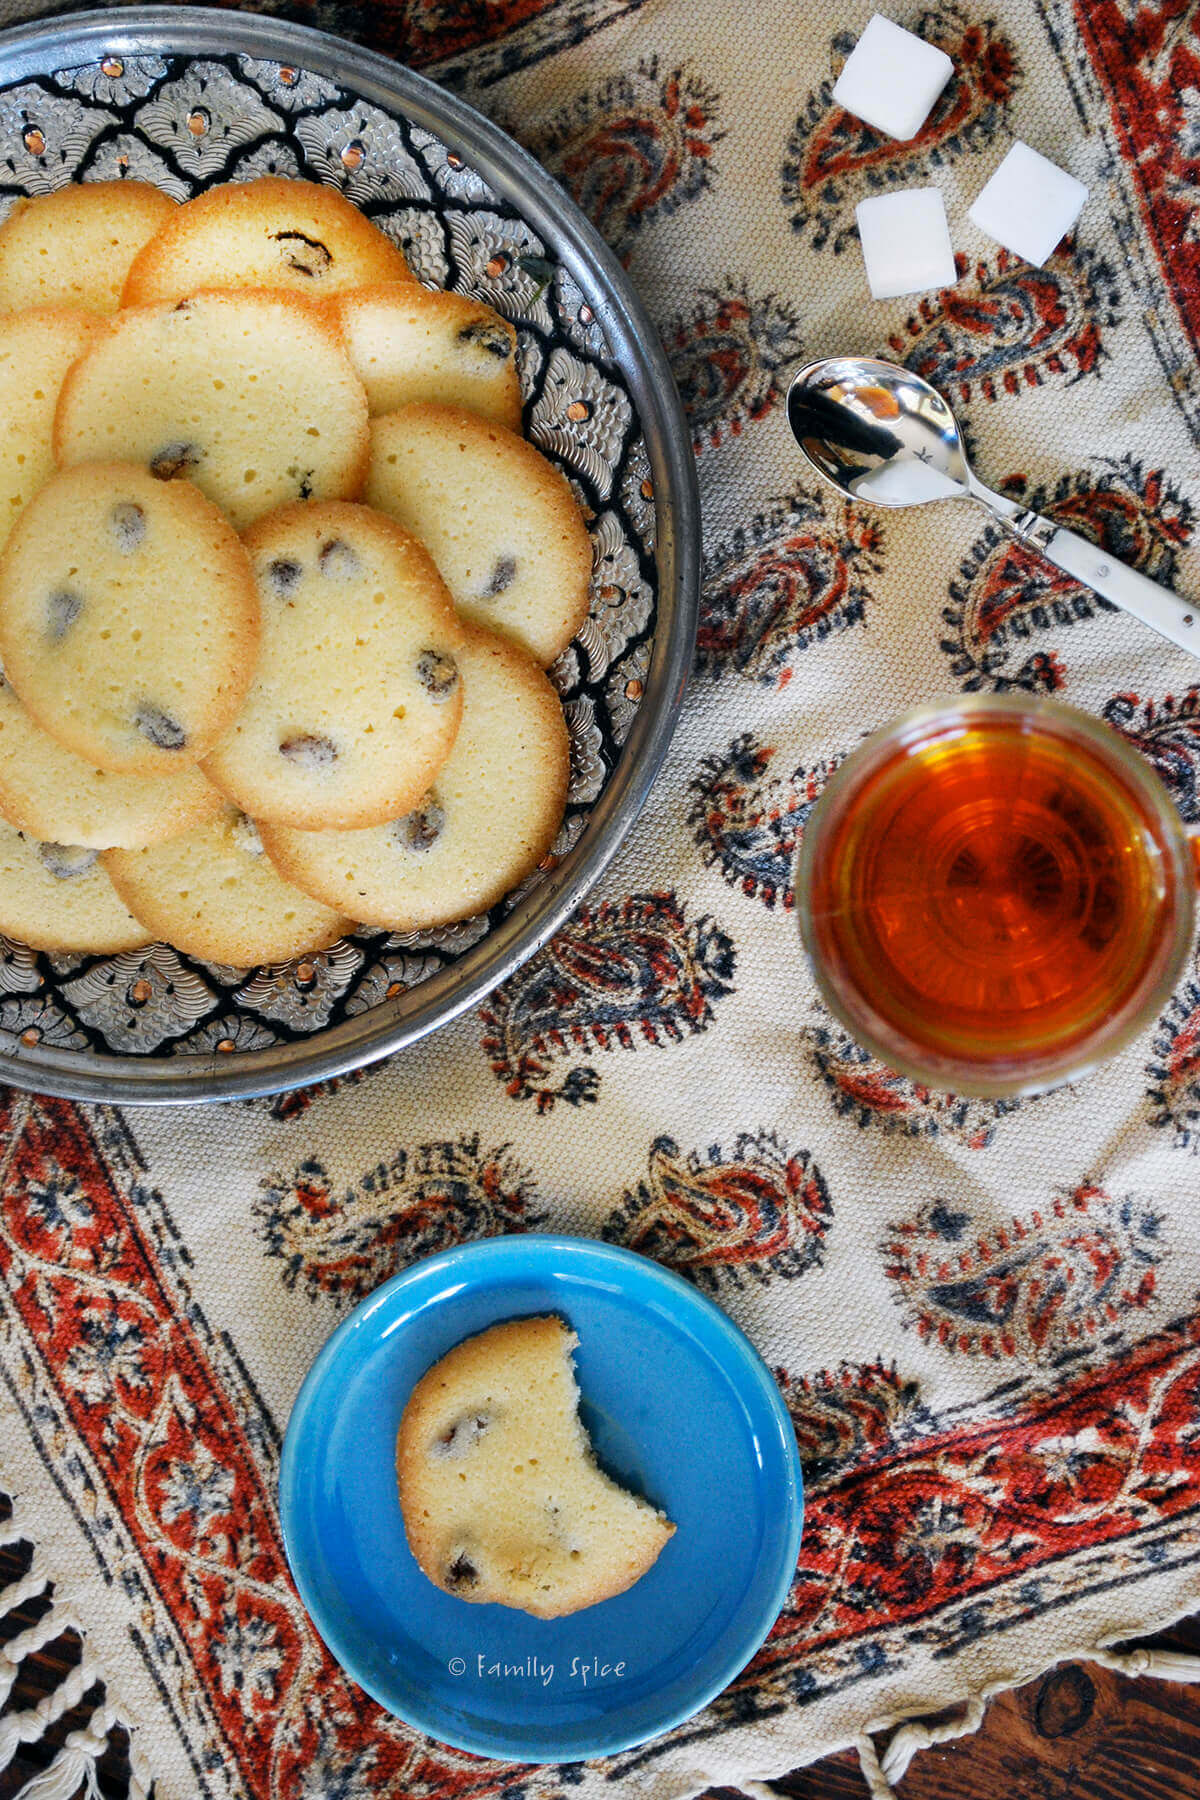 A Persian table cloth with a plate of saffron cookies on it and a glass of hot tea